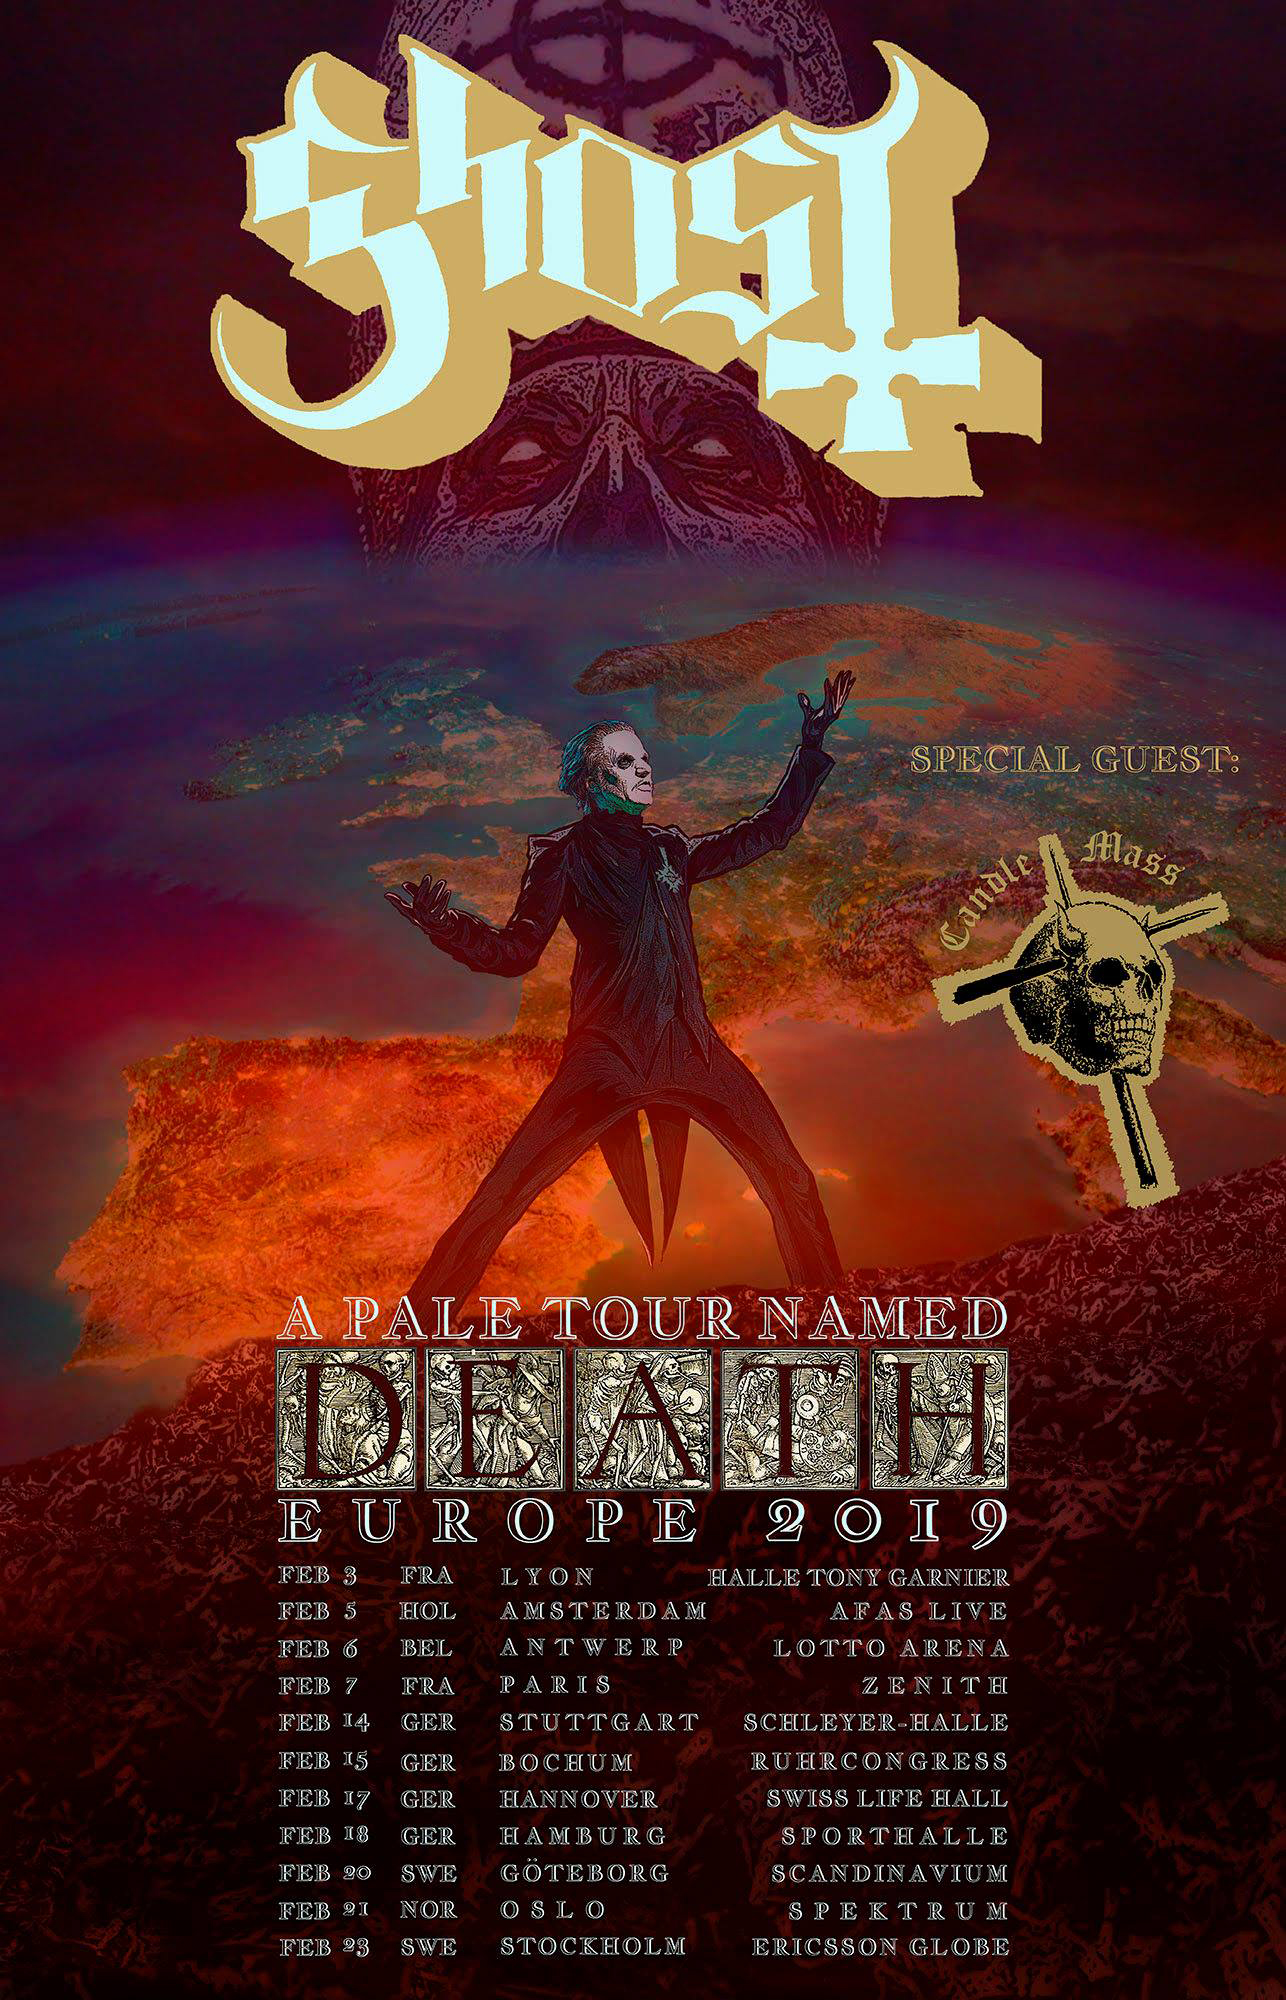   GHOST | A Pale Tour Named Death Official EU Tour poster   David M. Brinley | Illustrator Designer  Acrylic and Digital 